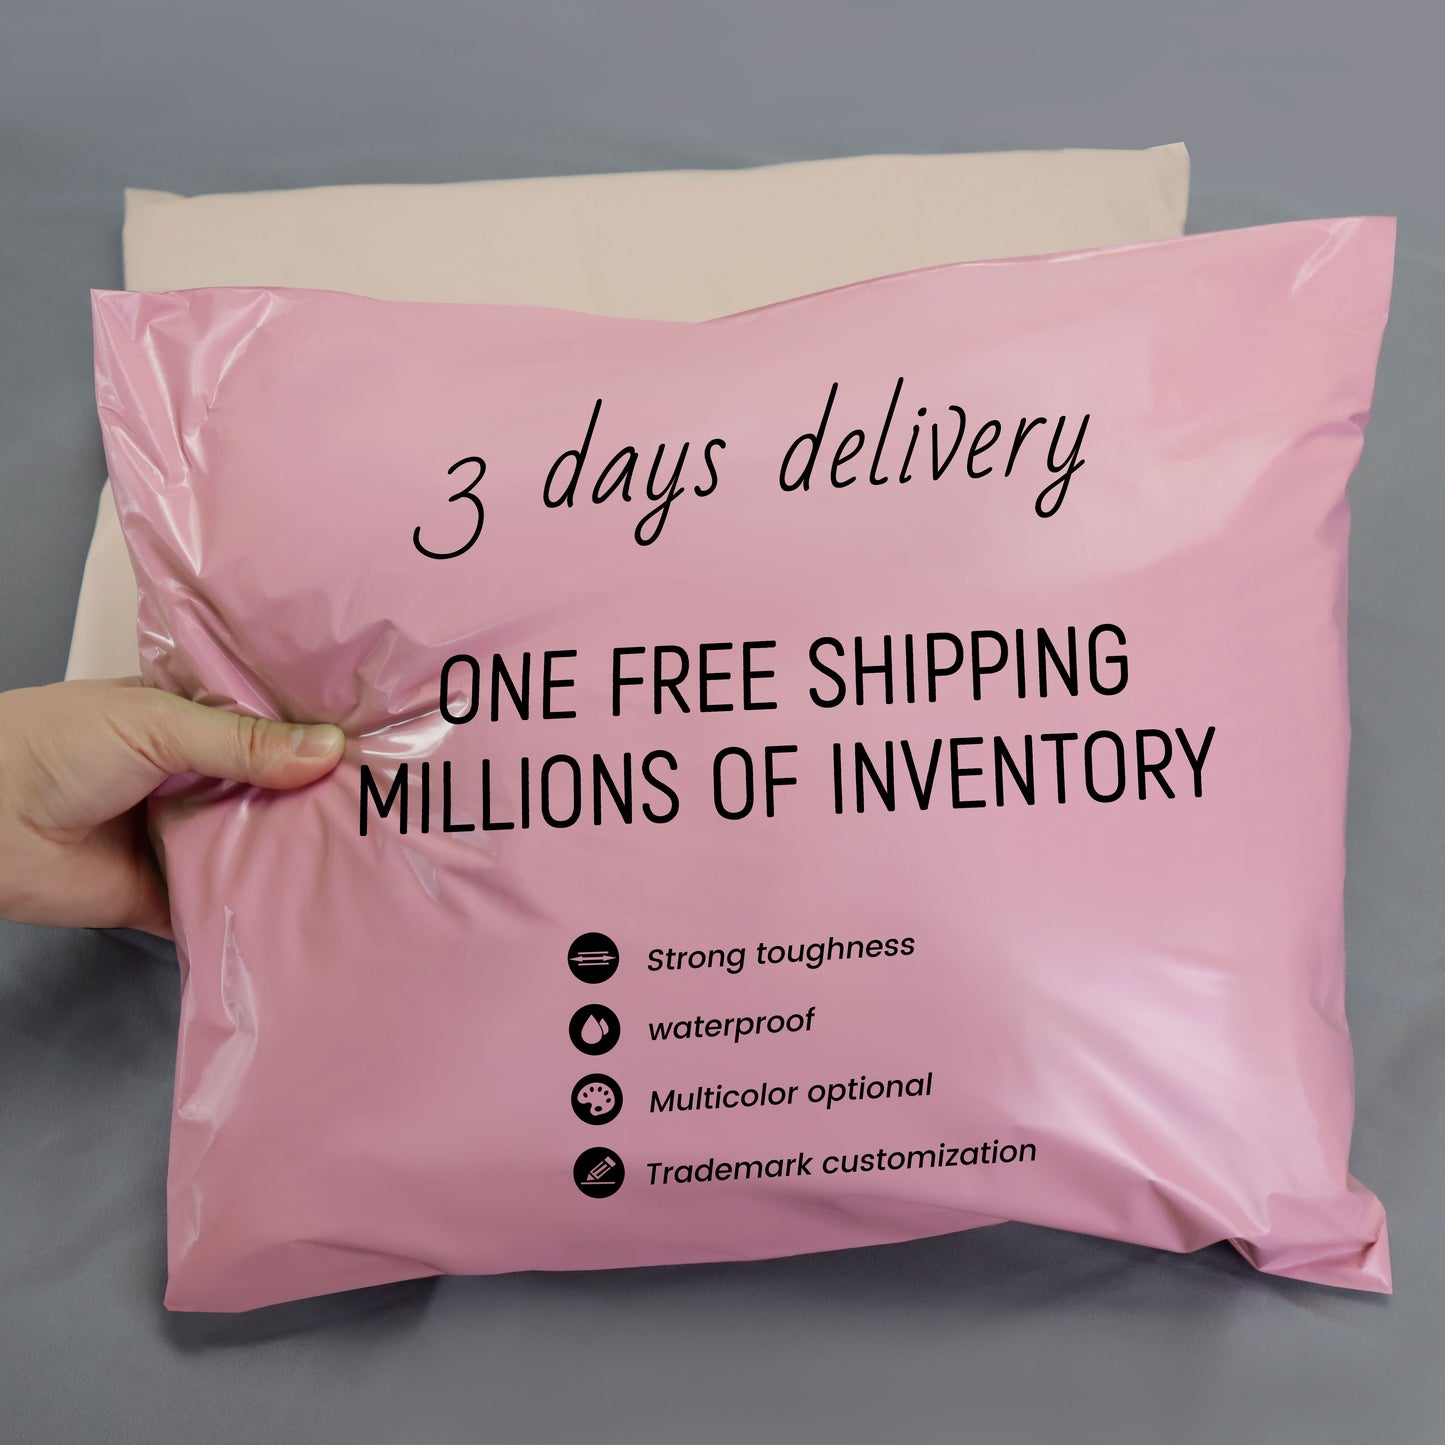 Mailer mailers mailing bag for shipping clothes bag tear proof apparel packaging custom logo printed plastic poly bags